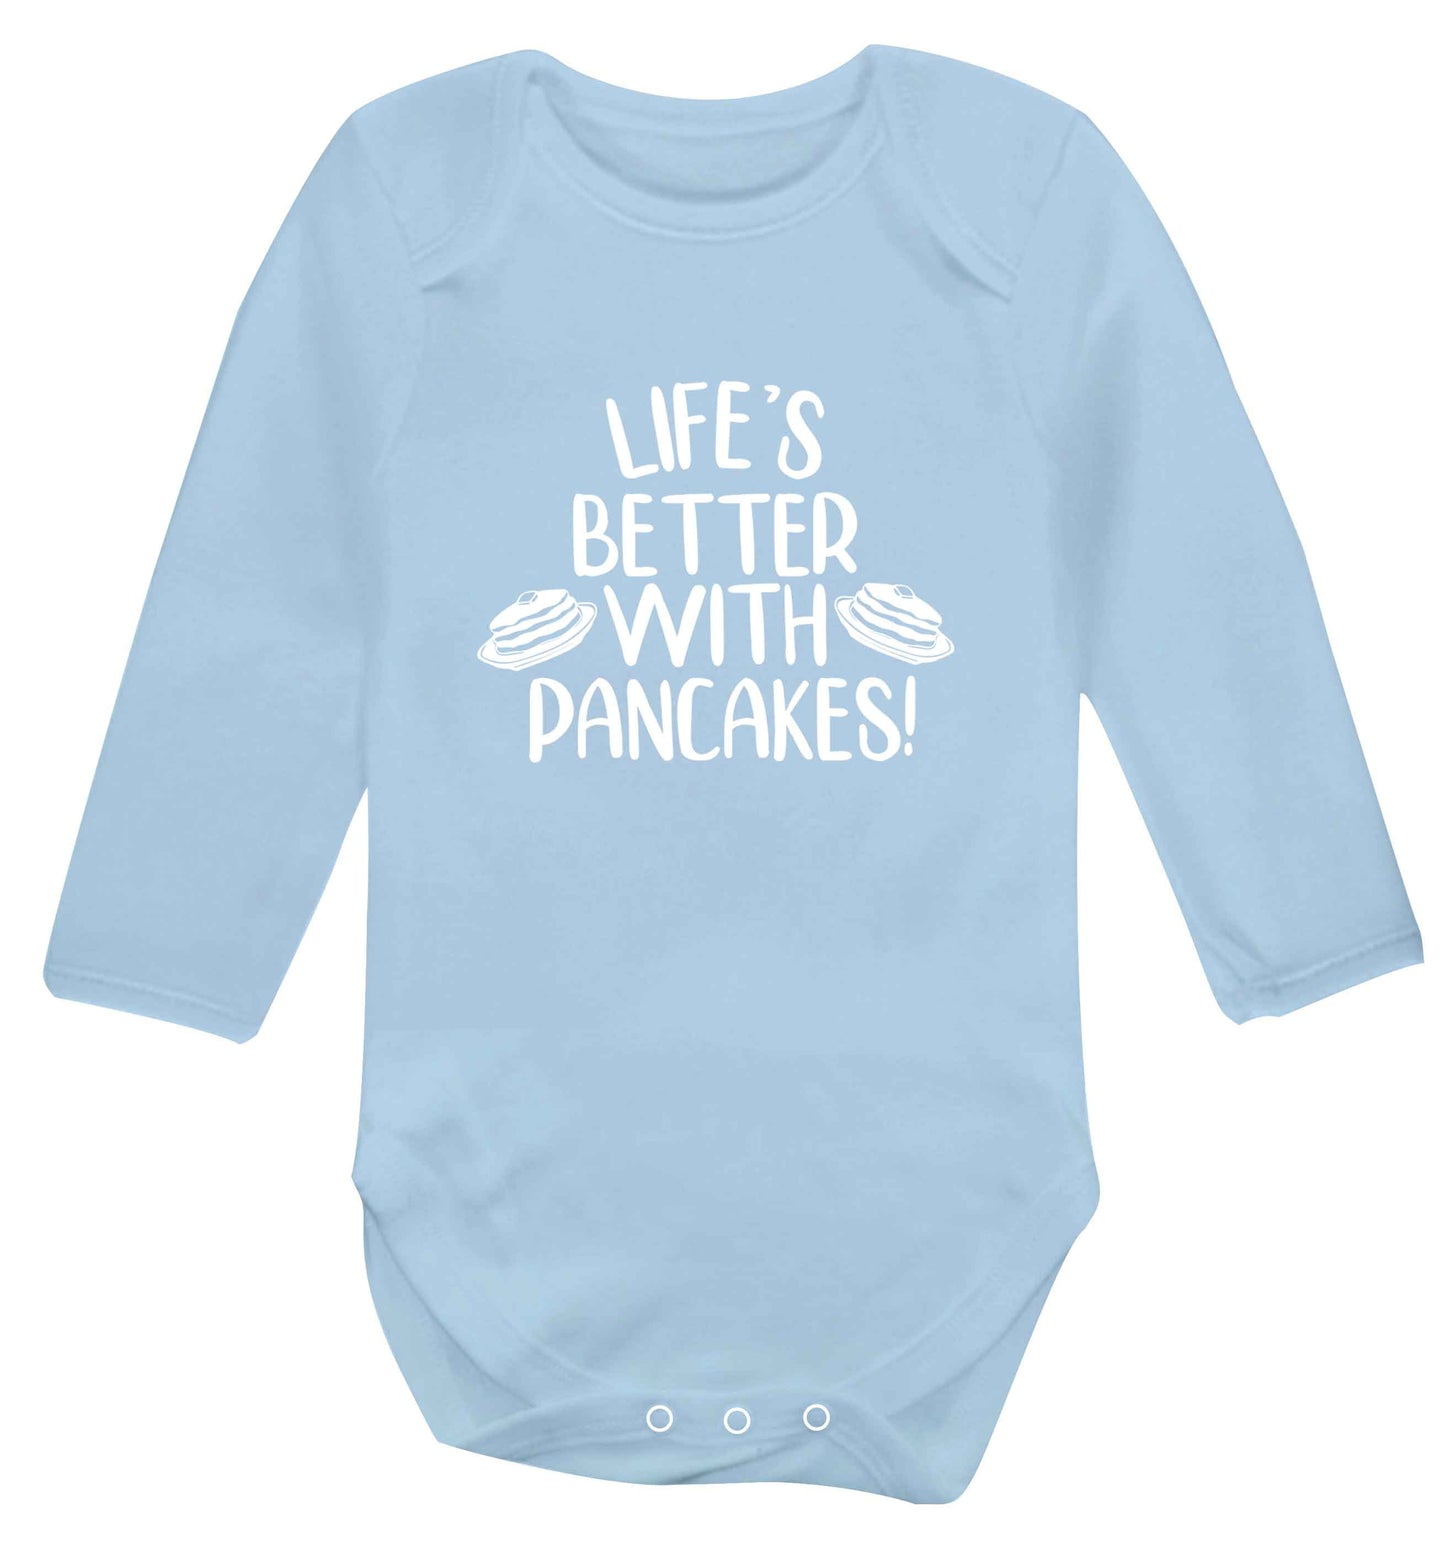 Life's better with pancakes baby vest long sleeved pale blue 6-12 months